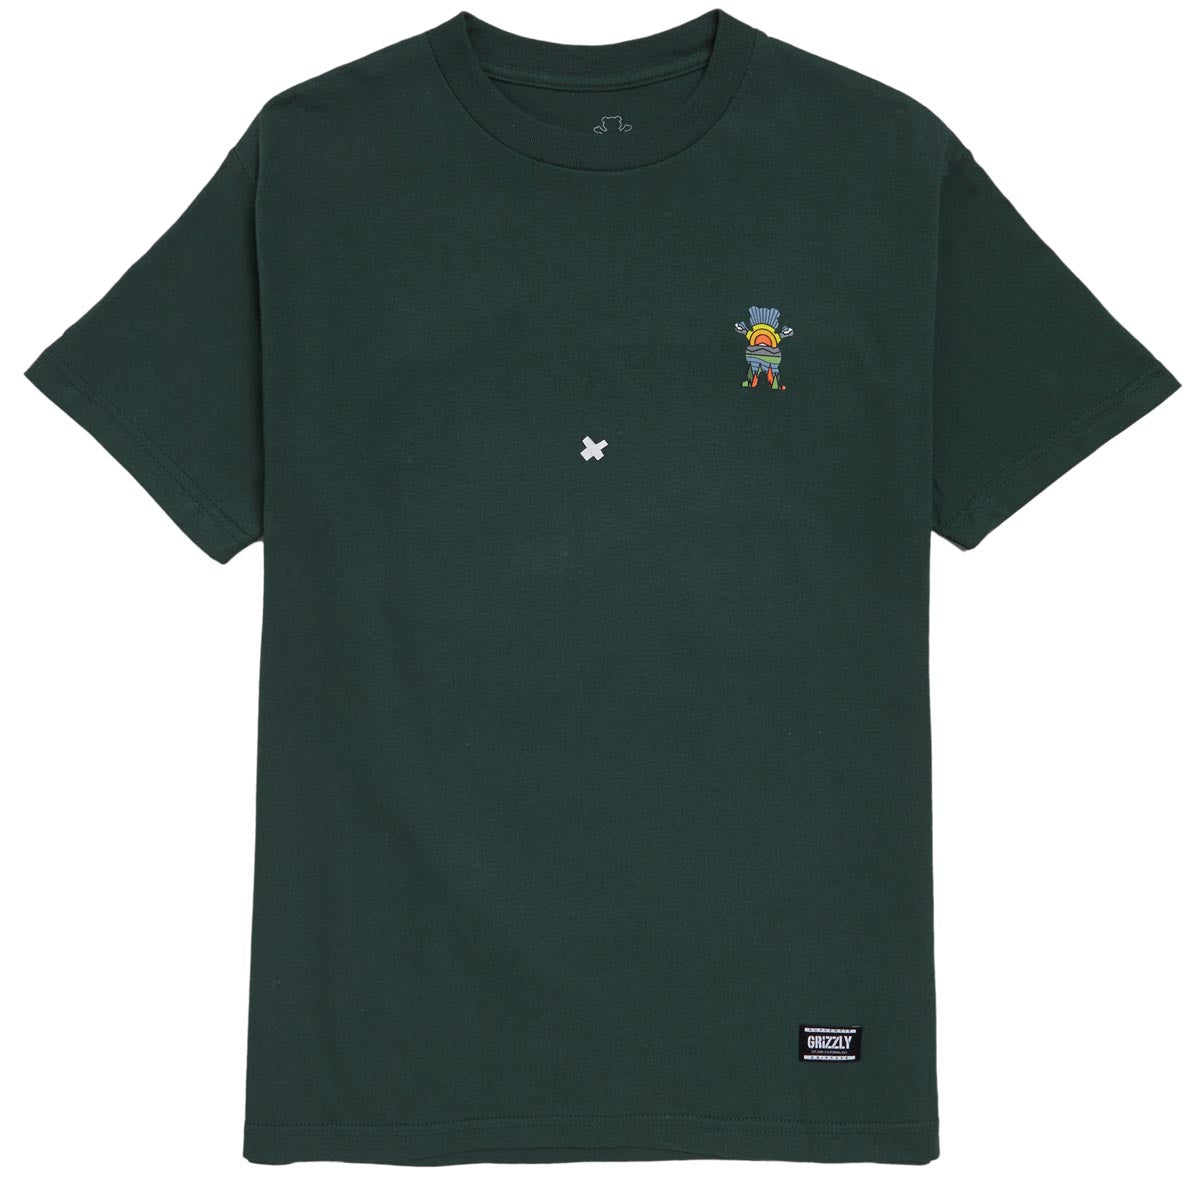 Grizzly Sun Valley T-Shirt - Forest Green image 2